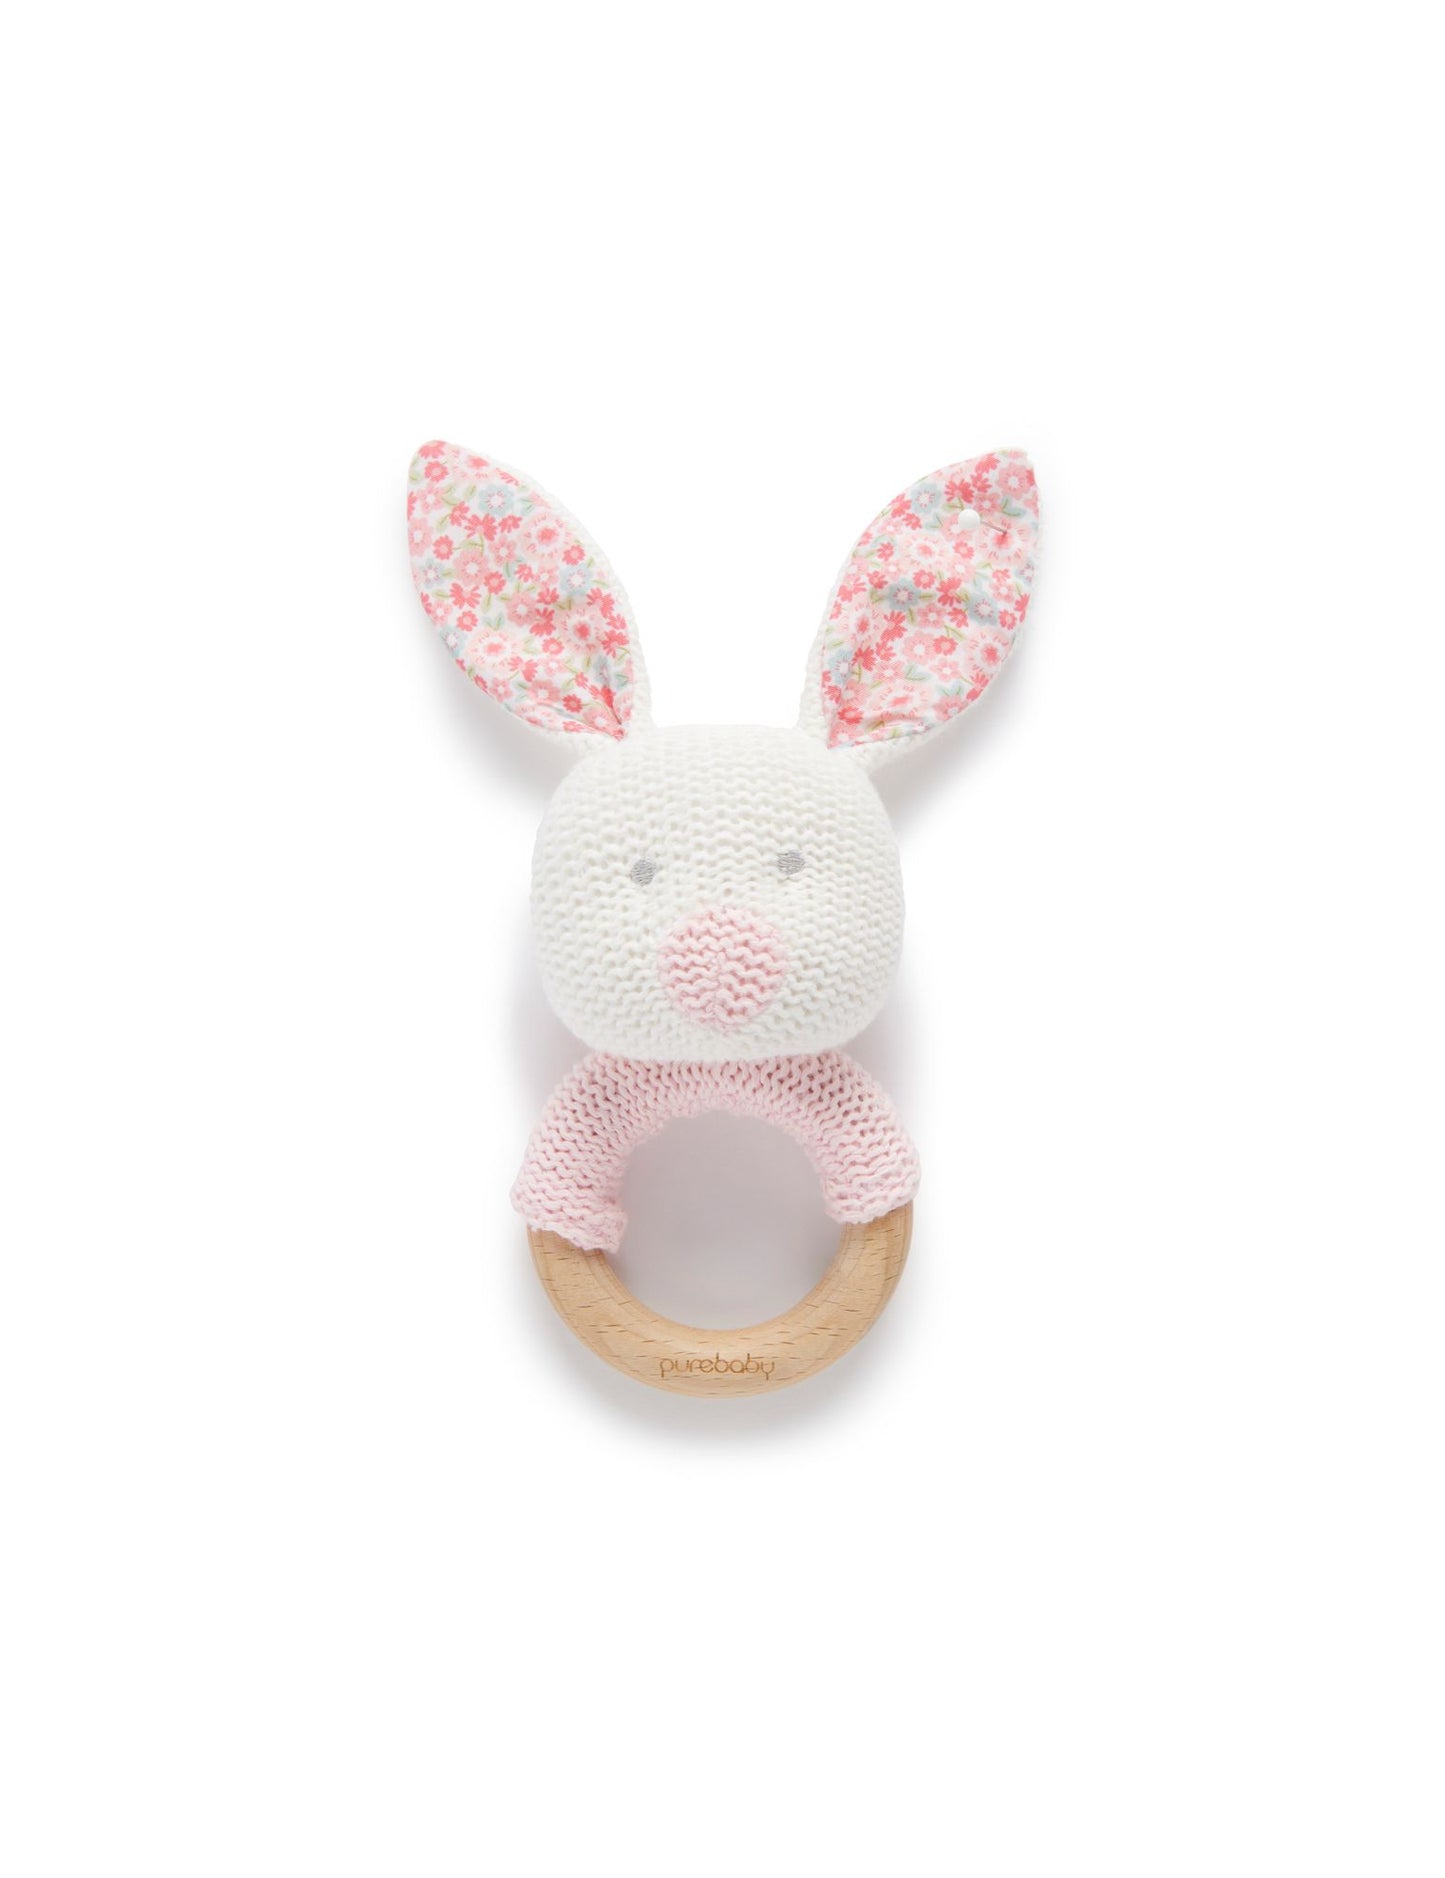 Purebaby Knitted Rattle